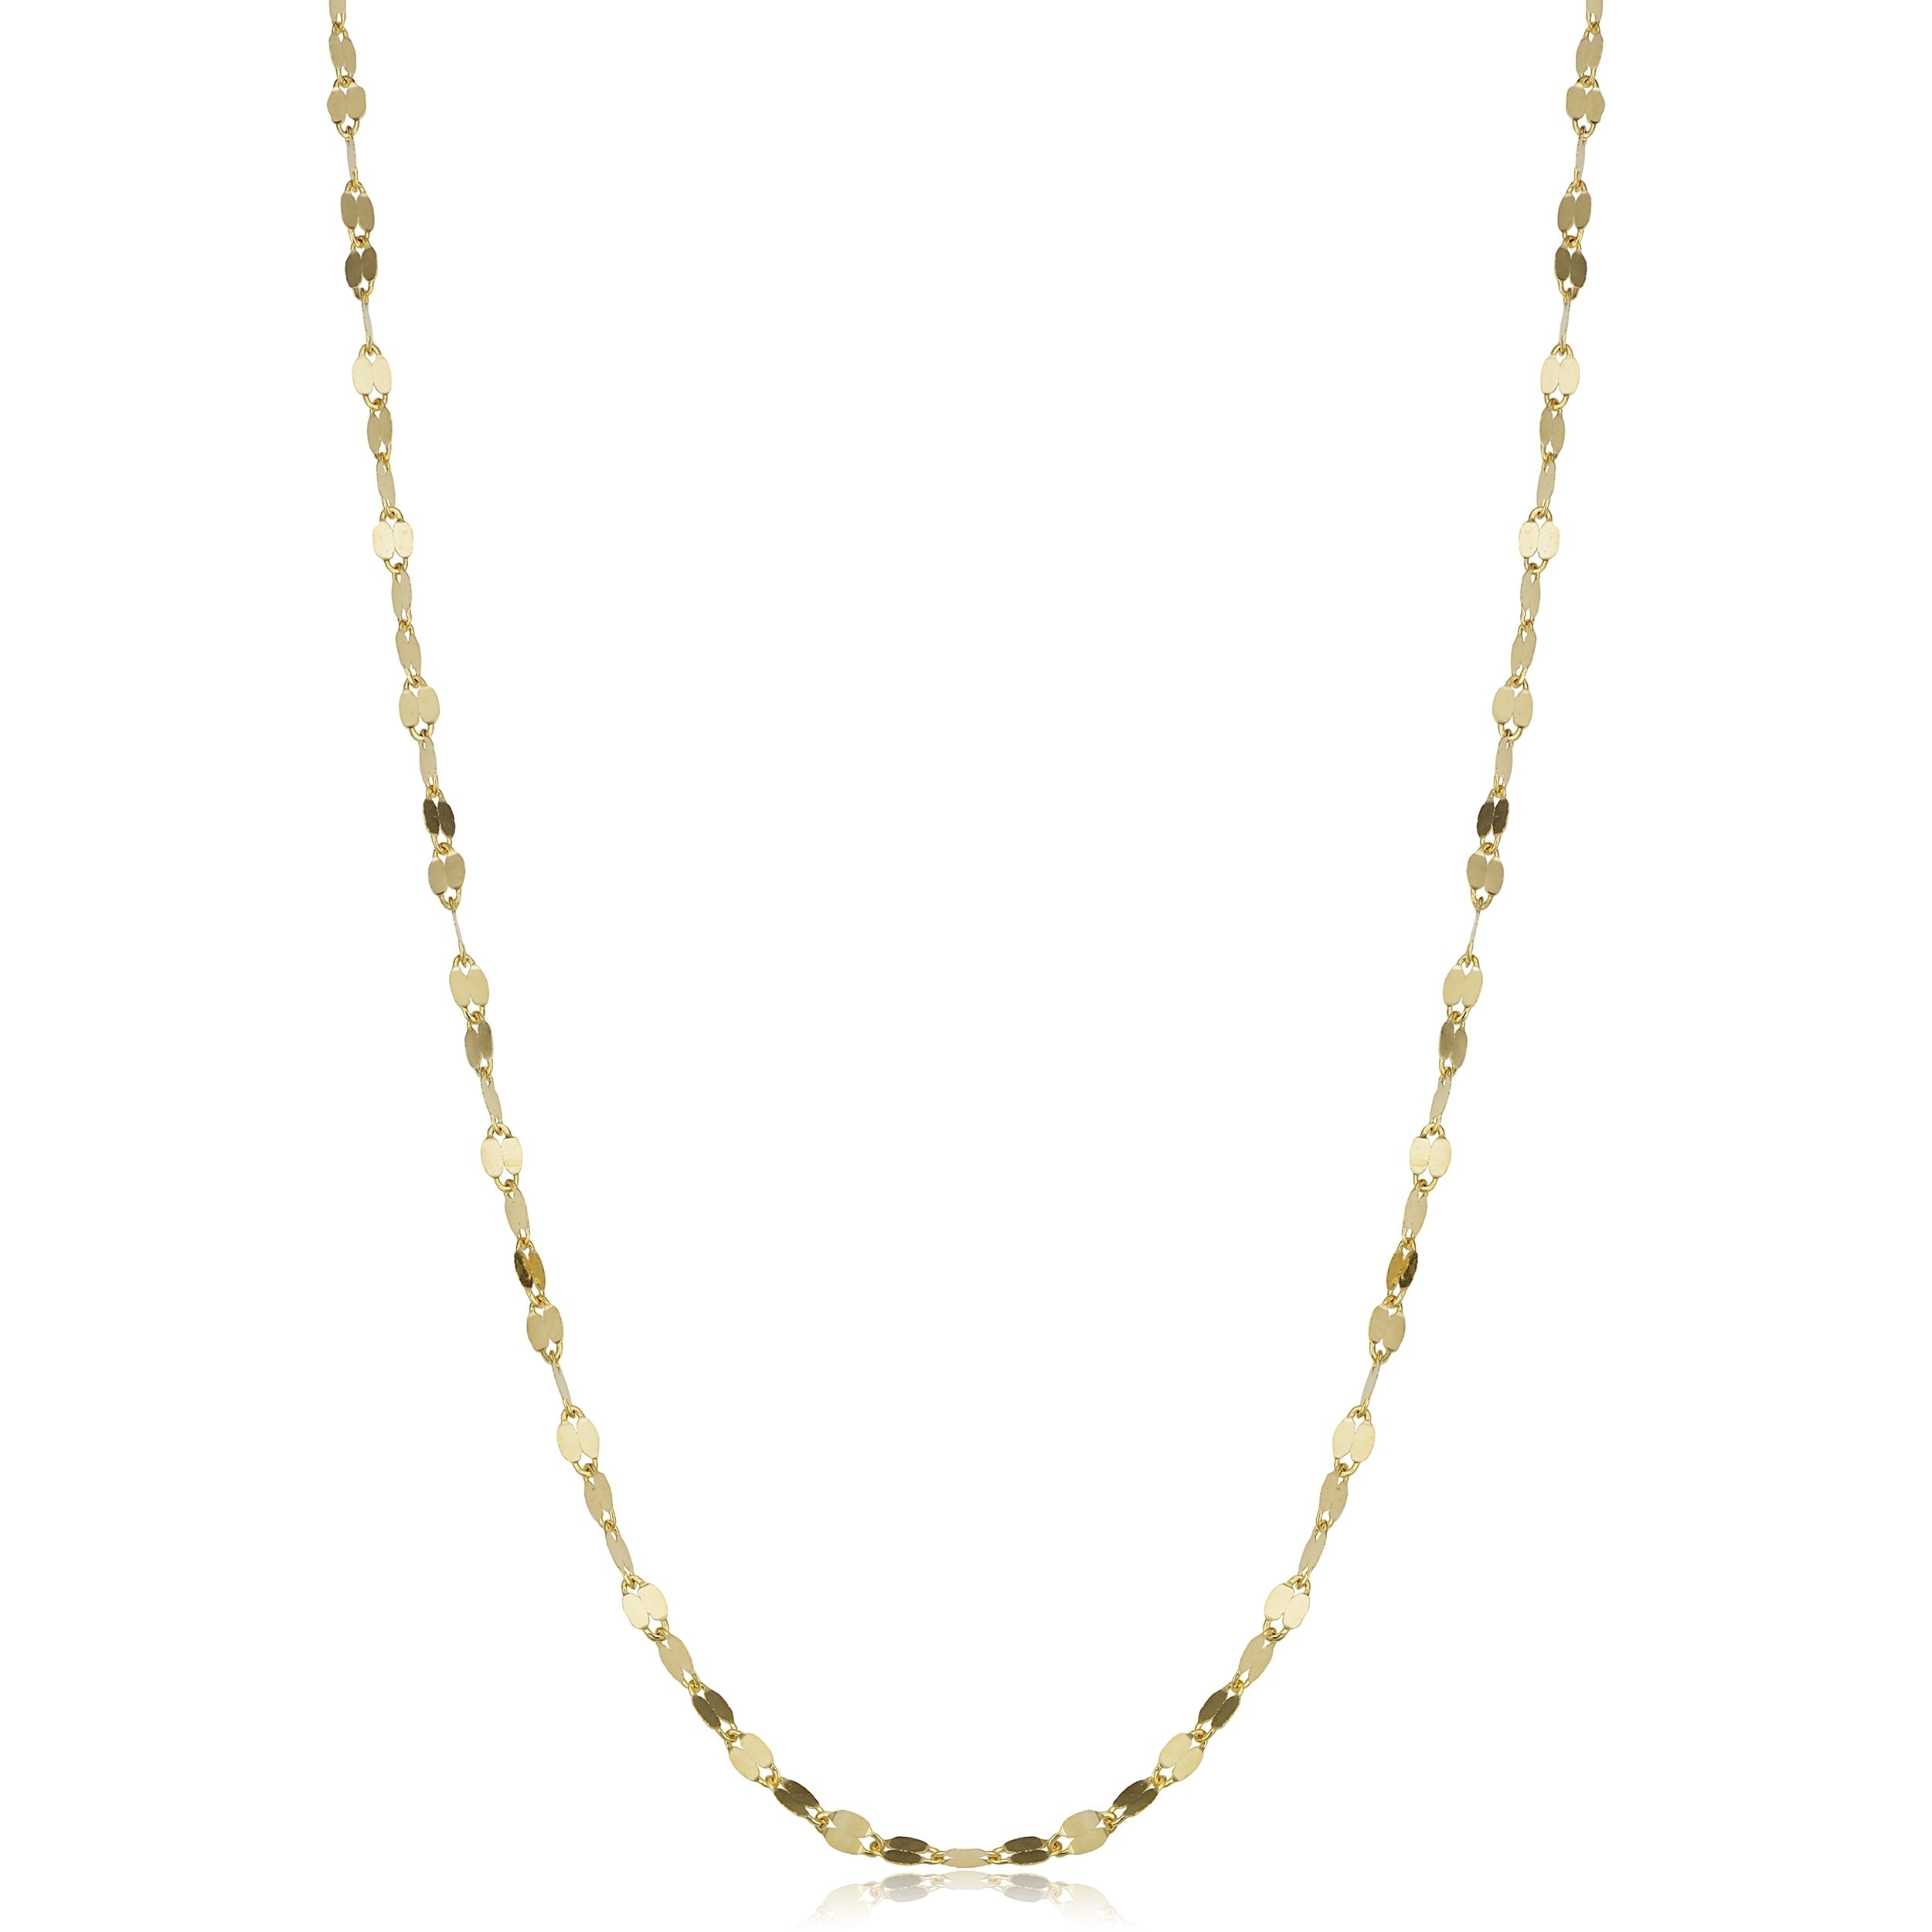 Simple and Beautiful Necklace 16 Inch Chain with Lobster Clasp 10K Yellow Gold Choker Necklace Handmade with Stunning White Freshwater Single Pearl 